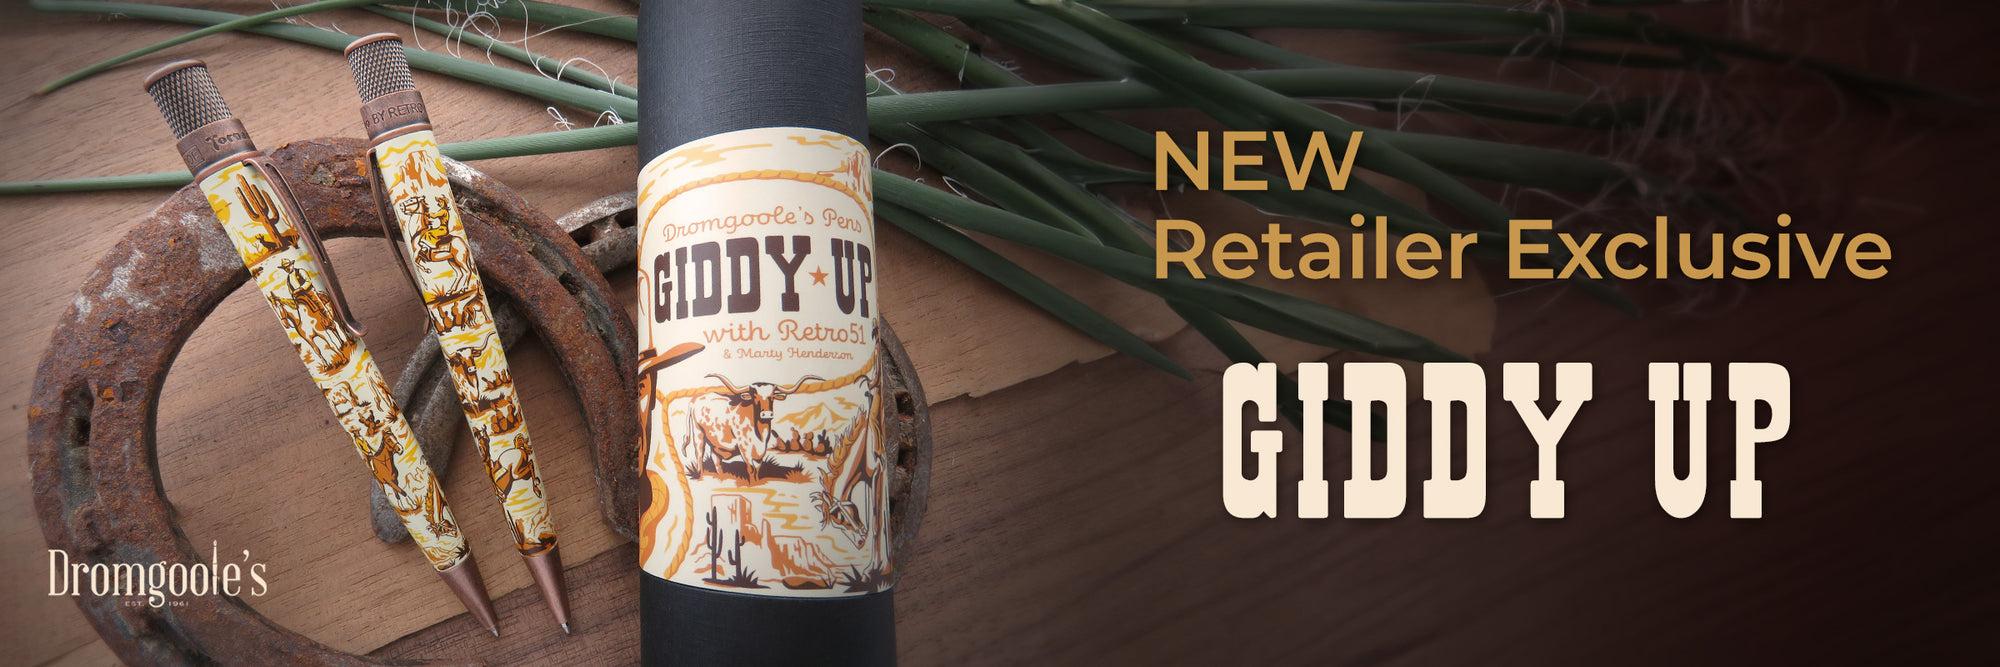 New Retailer Exclusive - Giddy Up